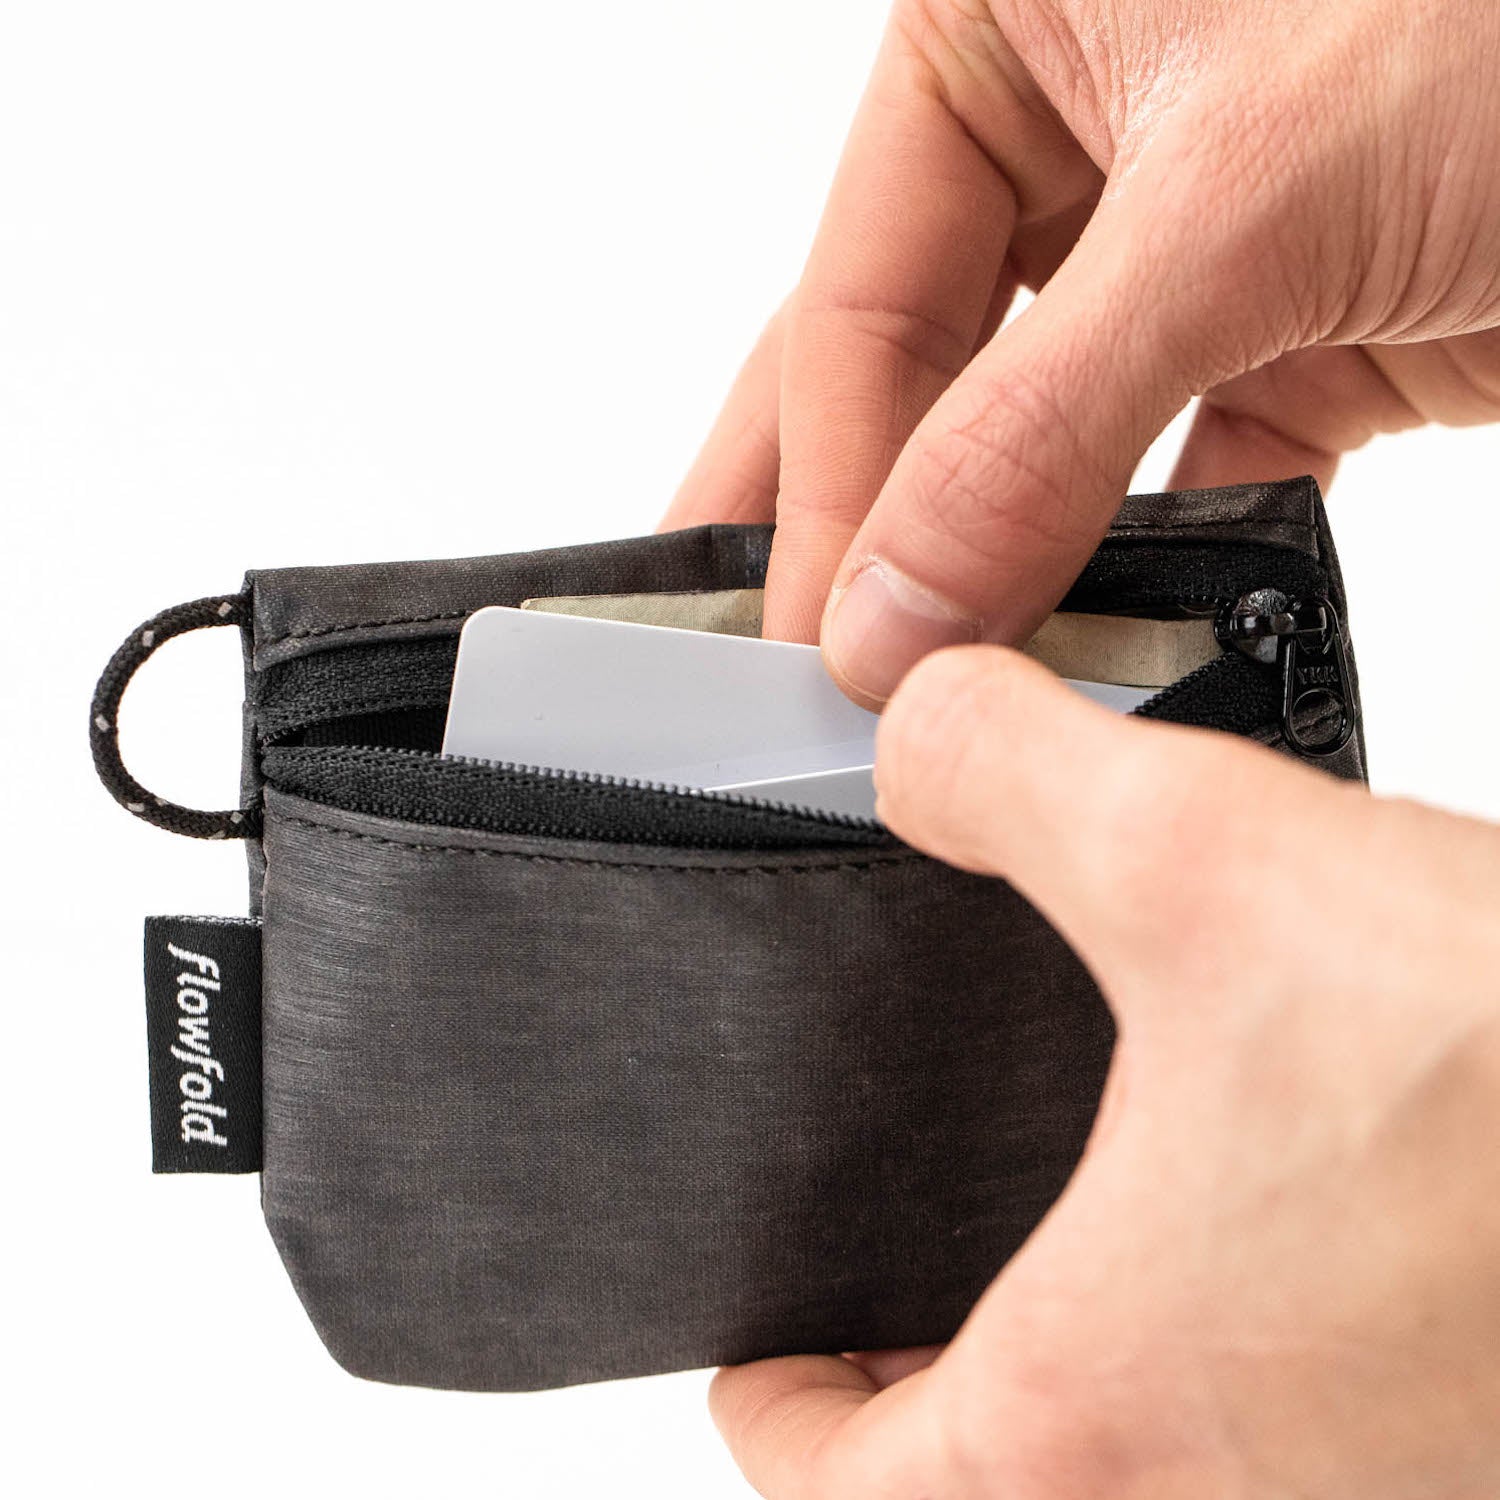 Flowfold Graphite Grey Essentialist Coin Pouch Wallet For Cash, Cards, and Coins Made in USA, Maine by Flowfold 